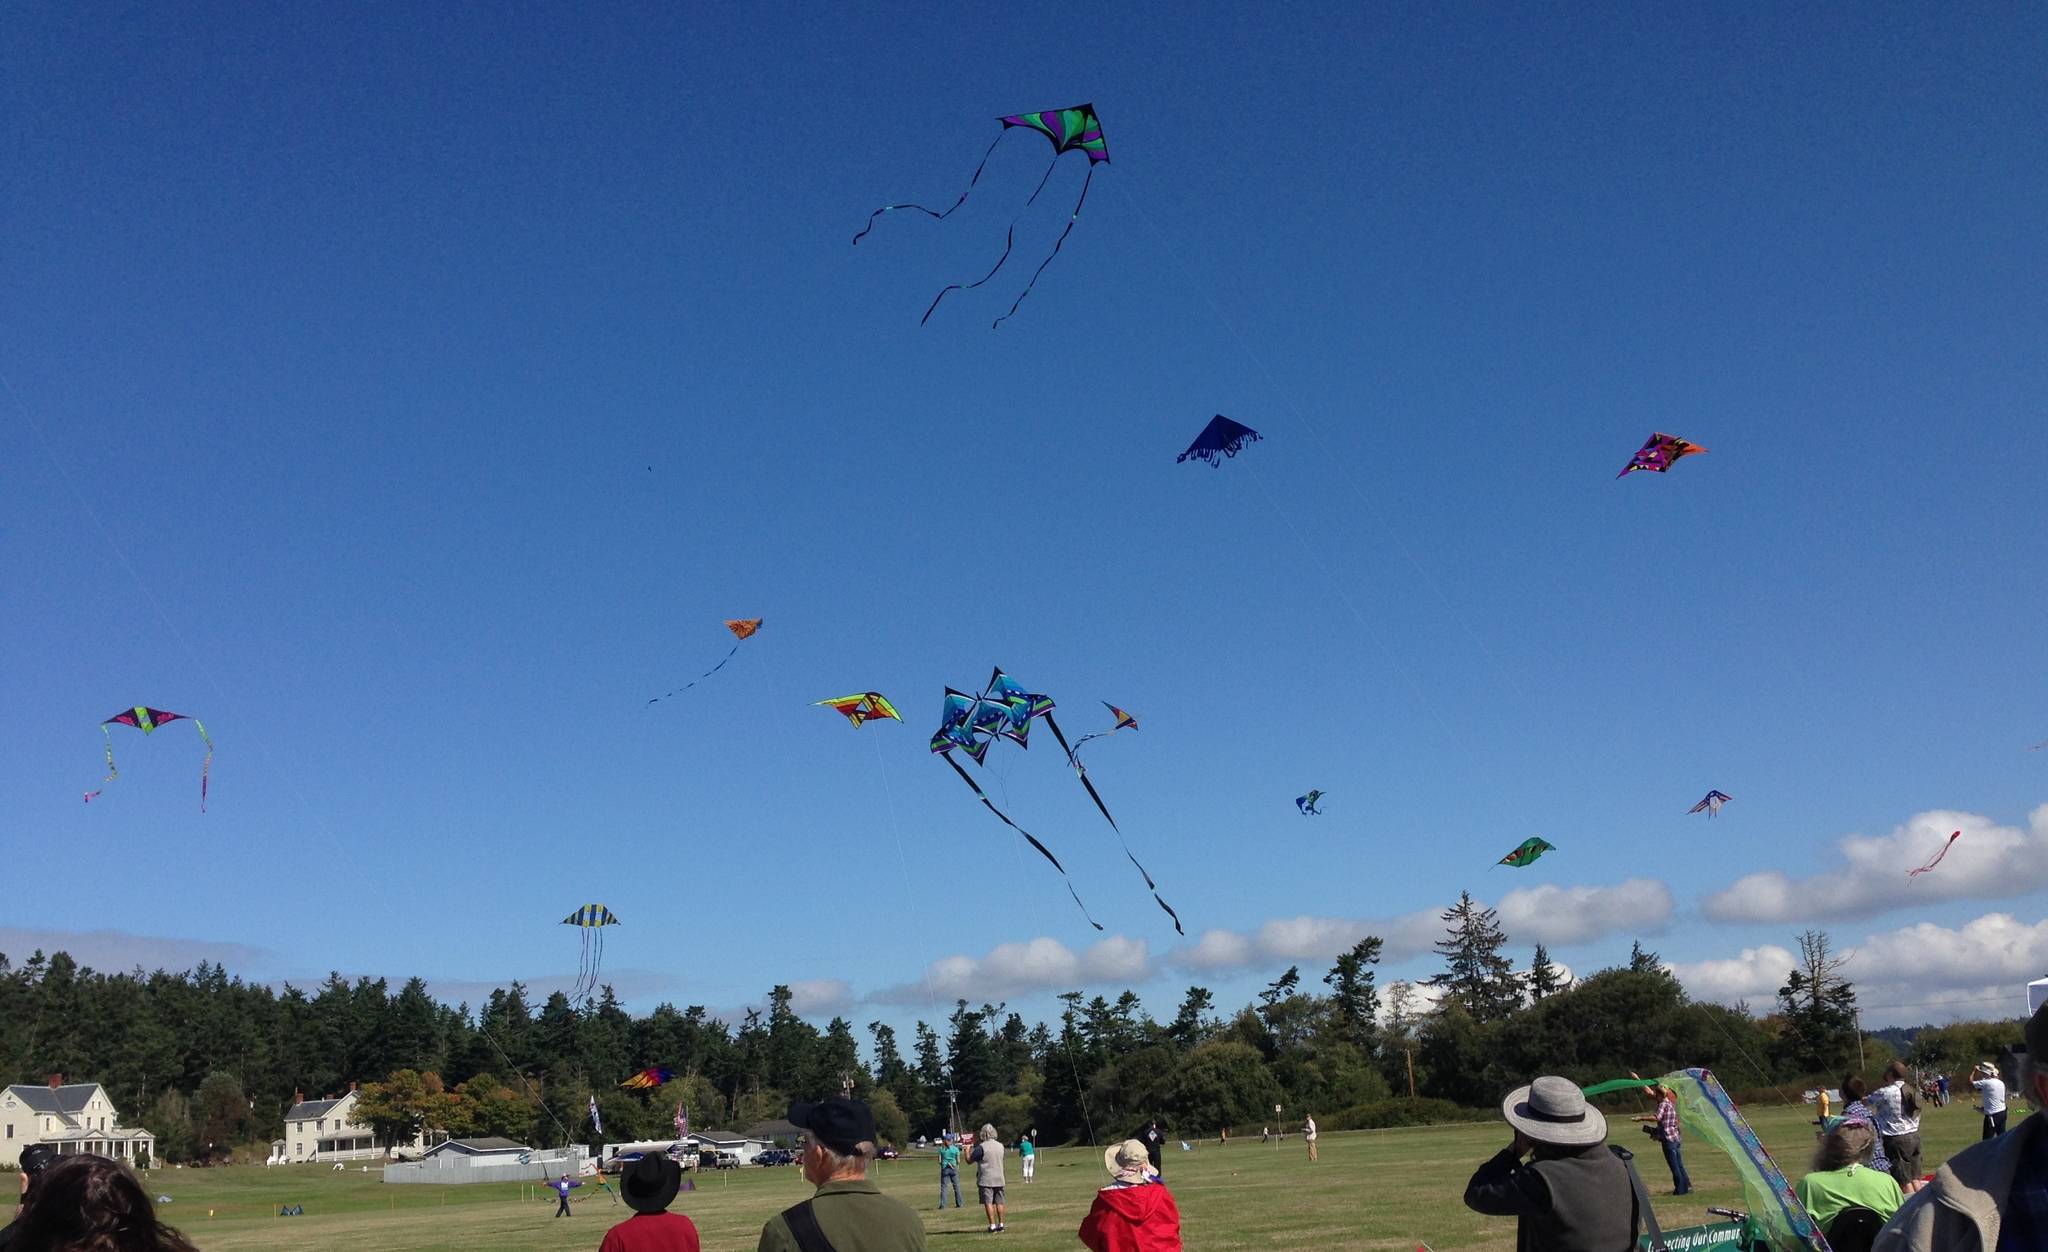 Photo courtesy of Whidbey Island Kite Festival
Kite fliers gather for the Whidbey Island Kite Festival in 2019. The Festival is one of many end-of-summer events happening on Whidbey Island.